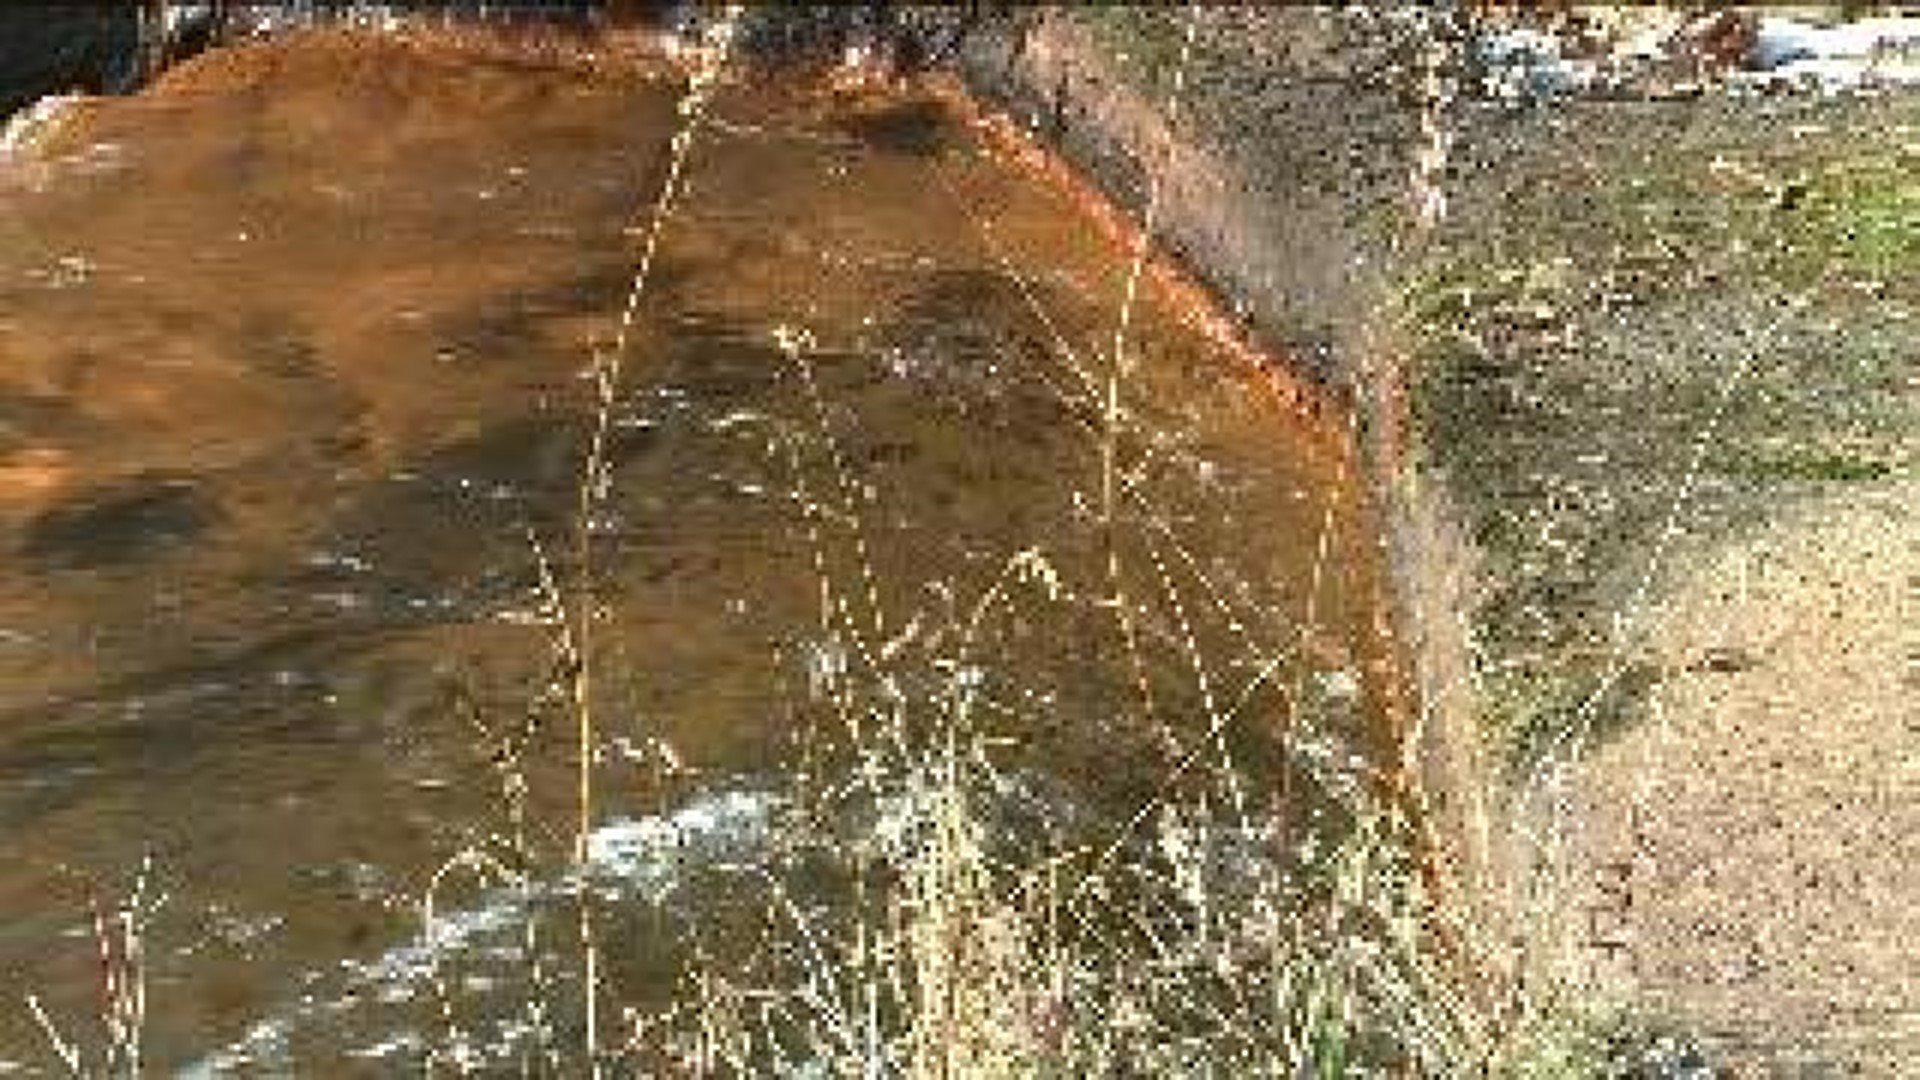 Company Plans to Clean Up Lackawanna River